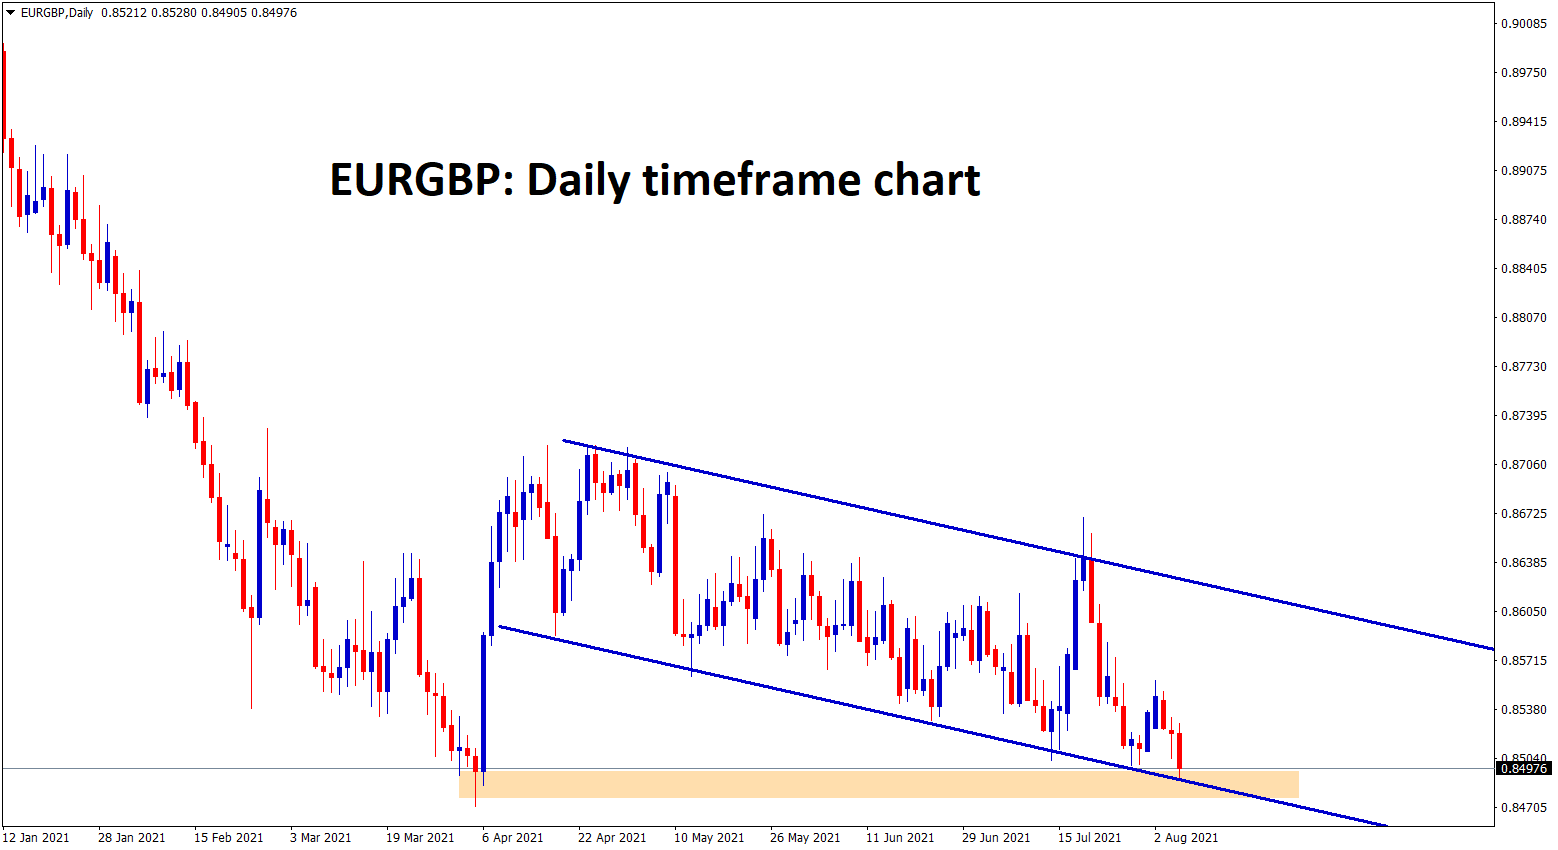 EURGBP at the lower low level and the recent support zone. wait for breakout or reversal